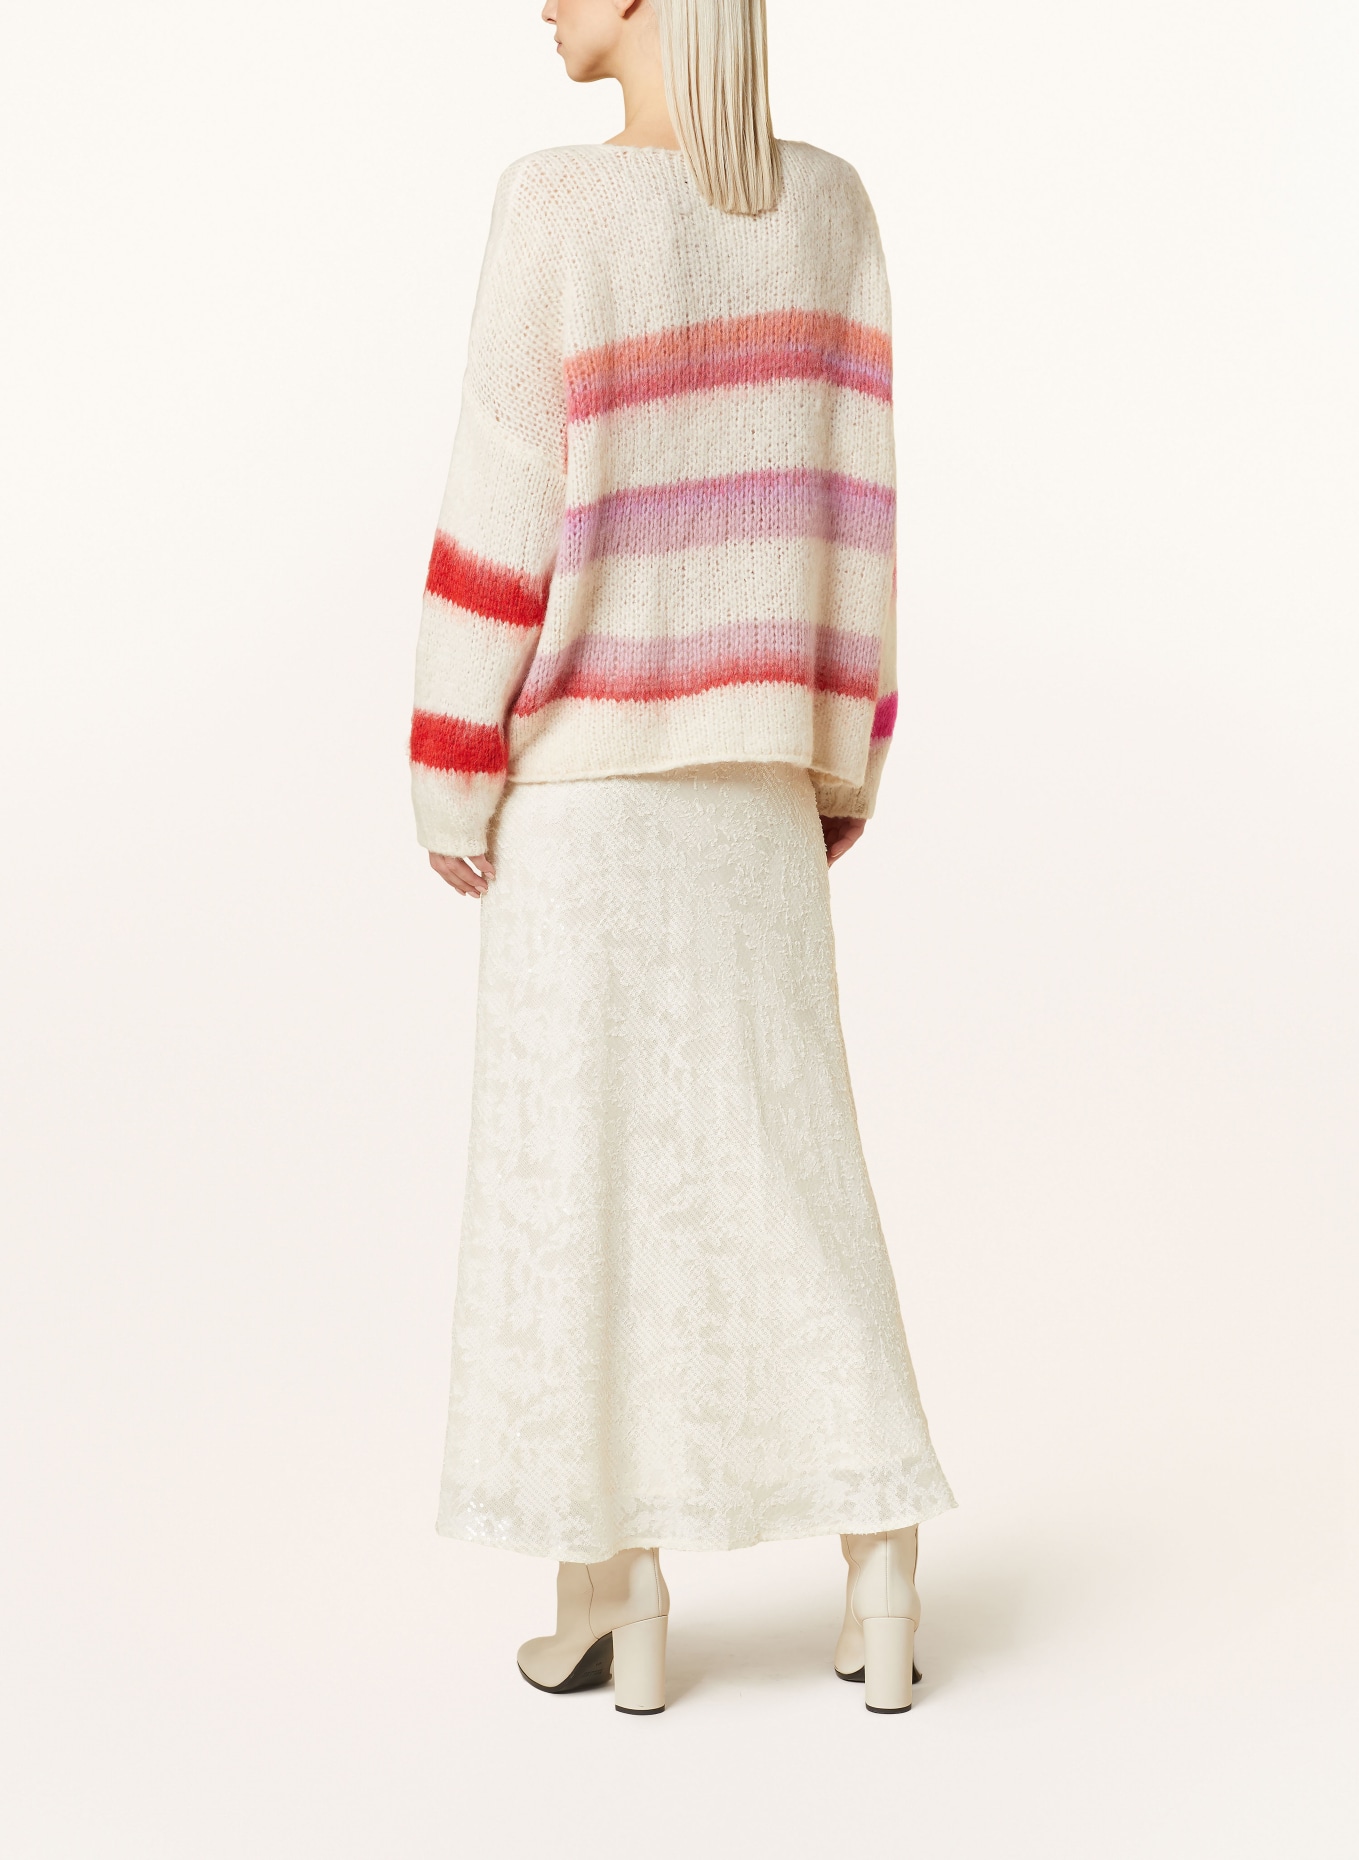 miss goodlife Sweater with mohair, Color: CREAM/ ROSE/ LIGHT ORANGE (Image 3)